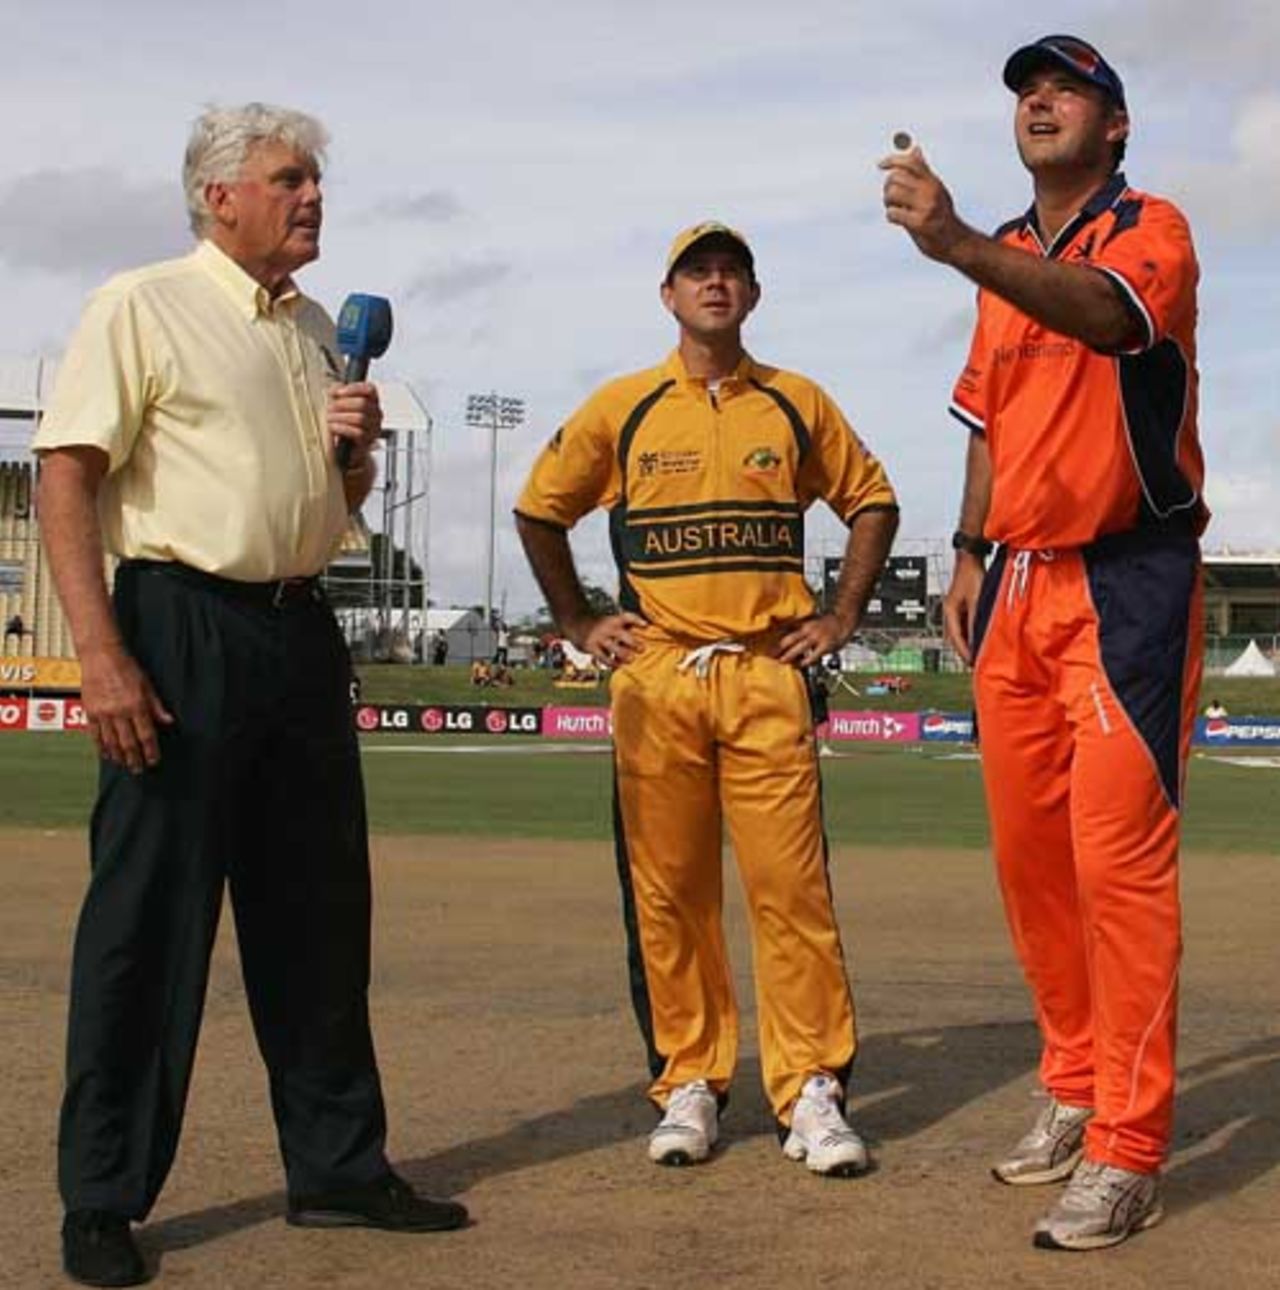 Ricky Ponting and Luuk van Troost at the toss along with Barry Richards, Australia v Netherlands, Group A, St Kitts, March 18, 2007